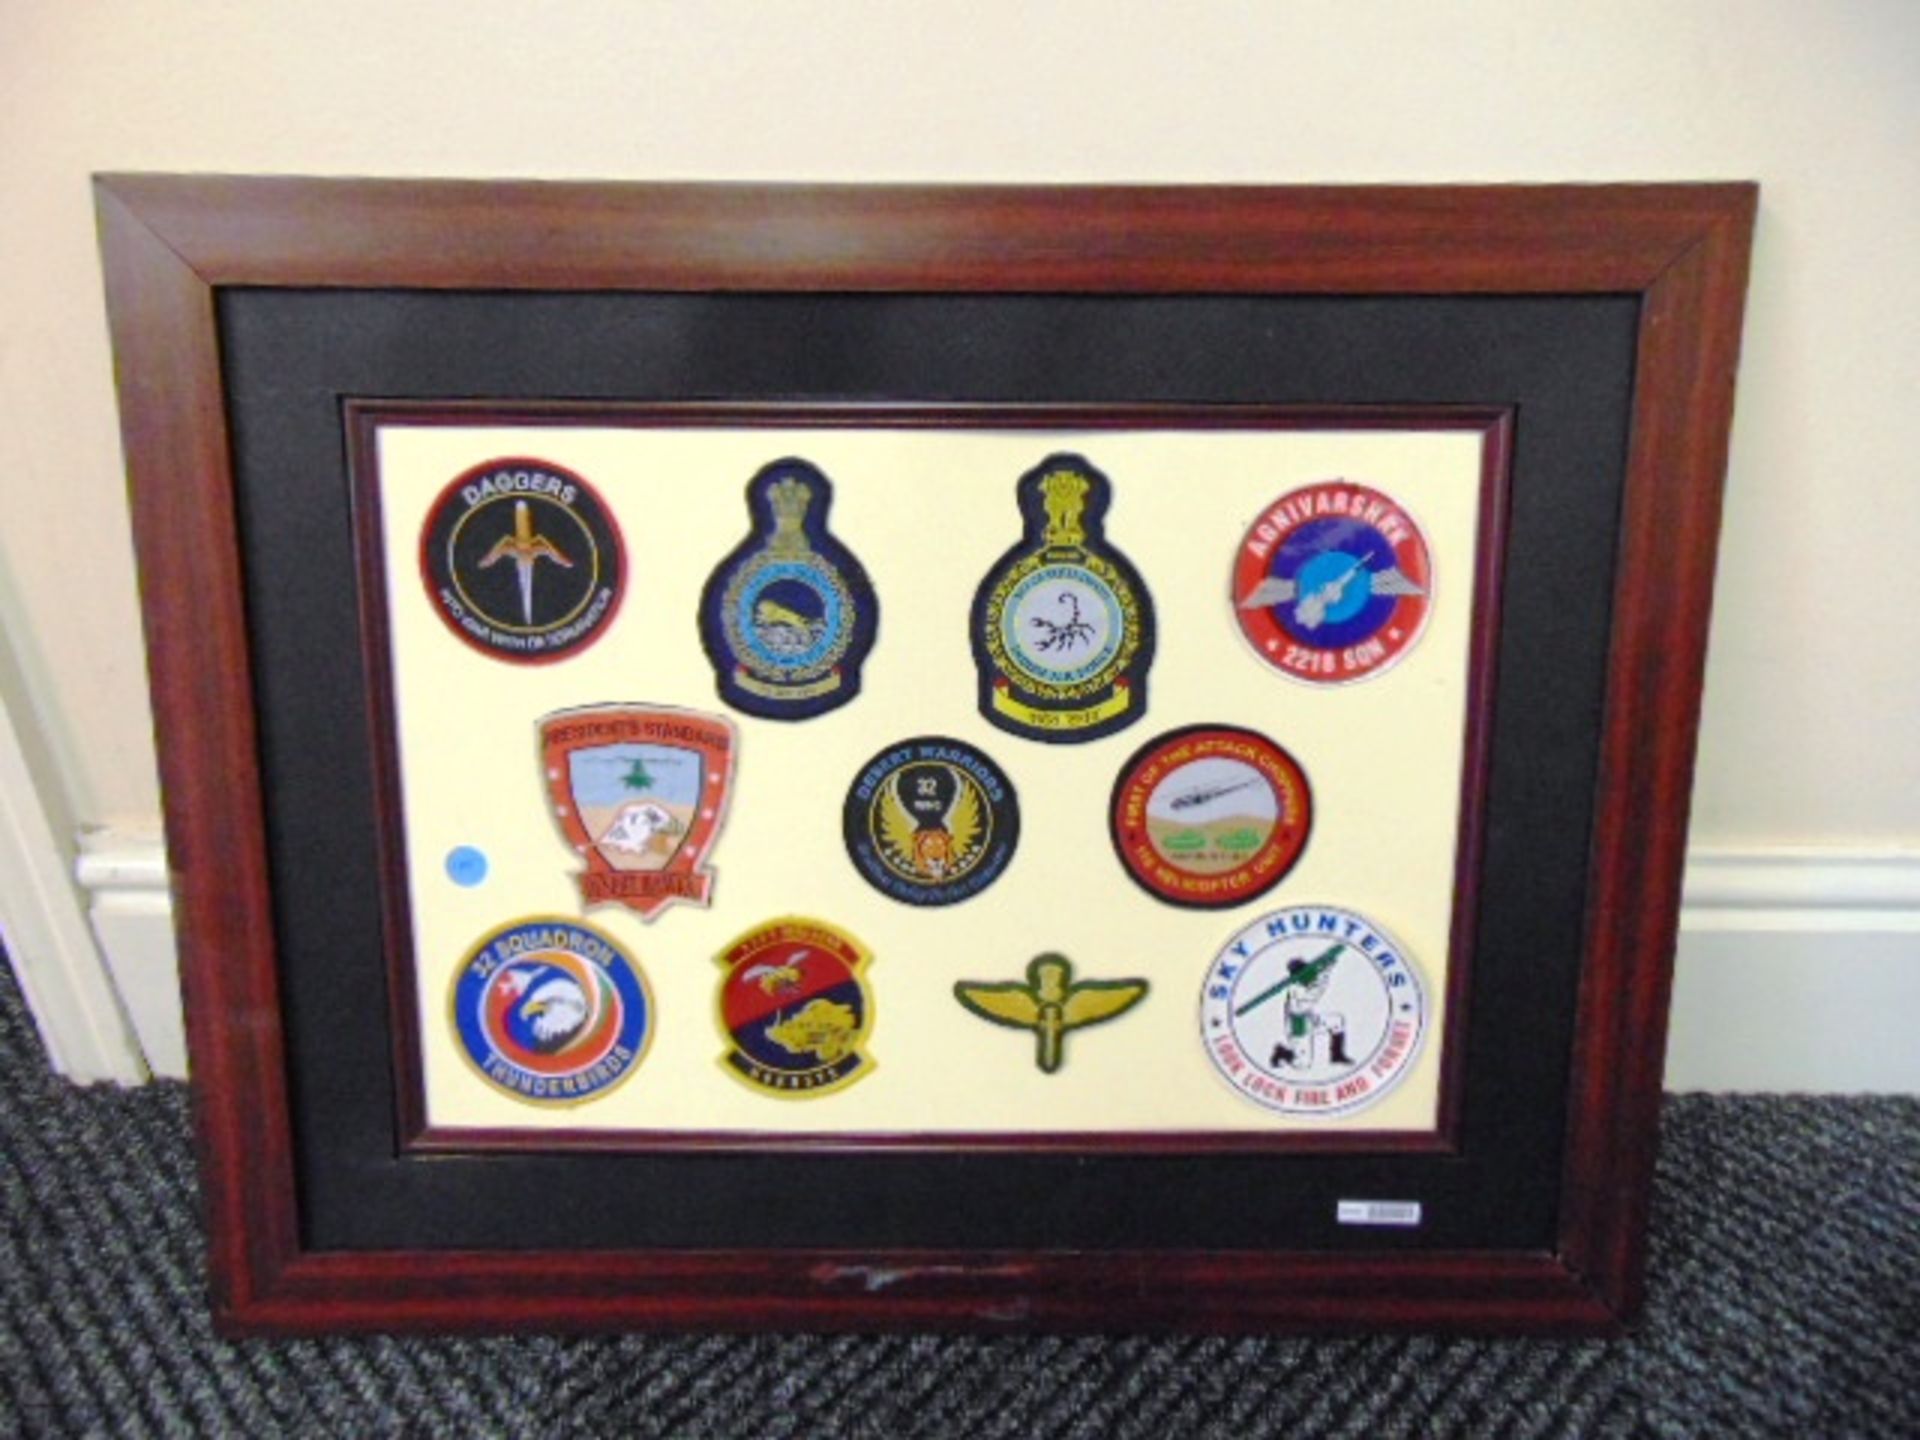 Framed Collection of Military Embroidered Insignia Patches